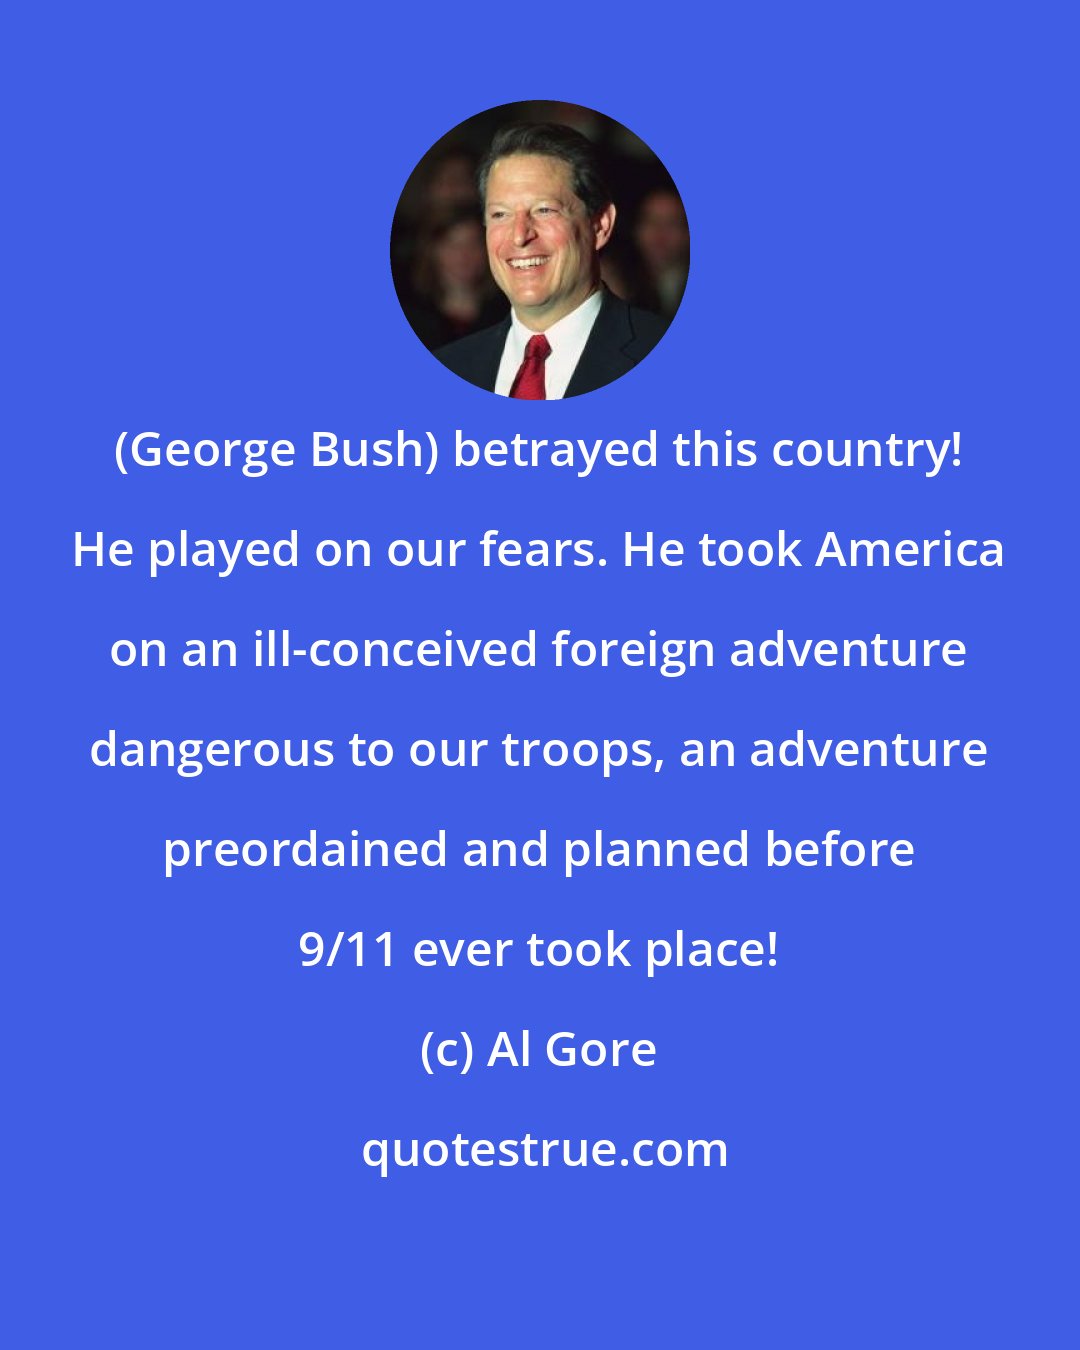 Al Gore: (George Bush) betrayed this country! He played on our fears. He took America on an ill-conceived foreign adventure dangerous to our troops, an adventure preordained and planned before 9/11 ever took place!